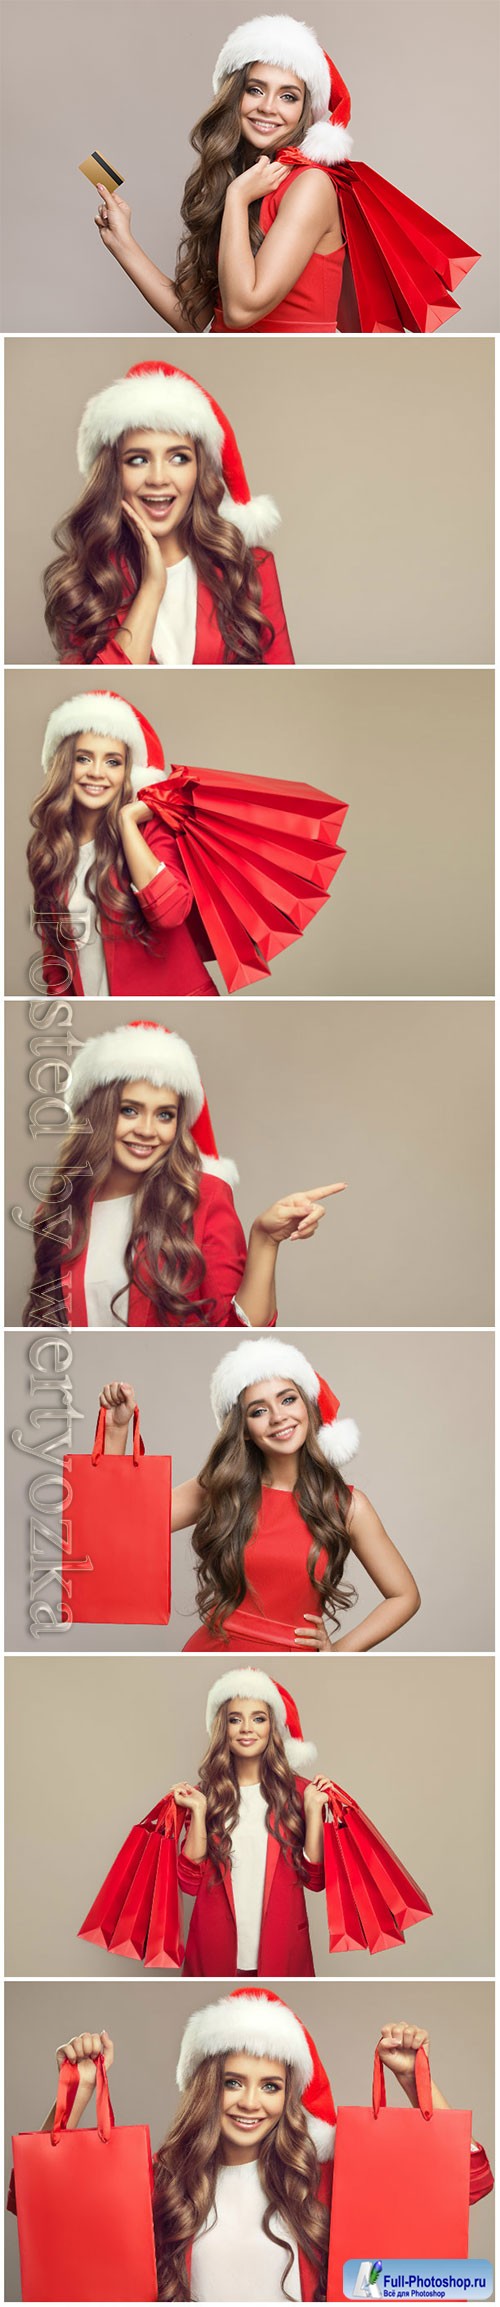 Woman, santa hat, holding, red, shopping, bags